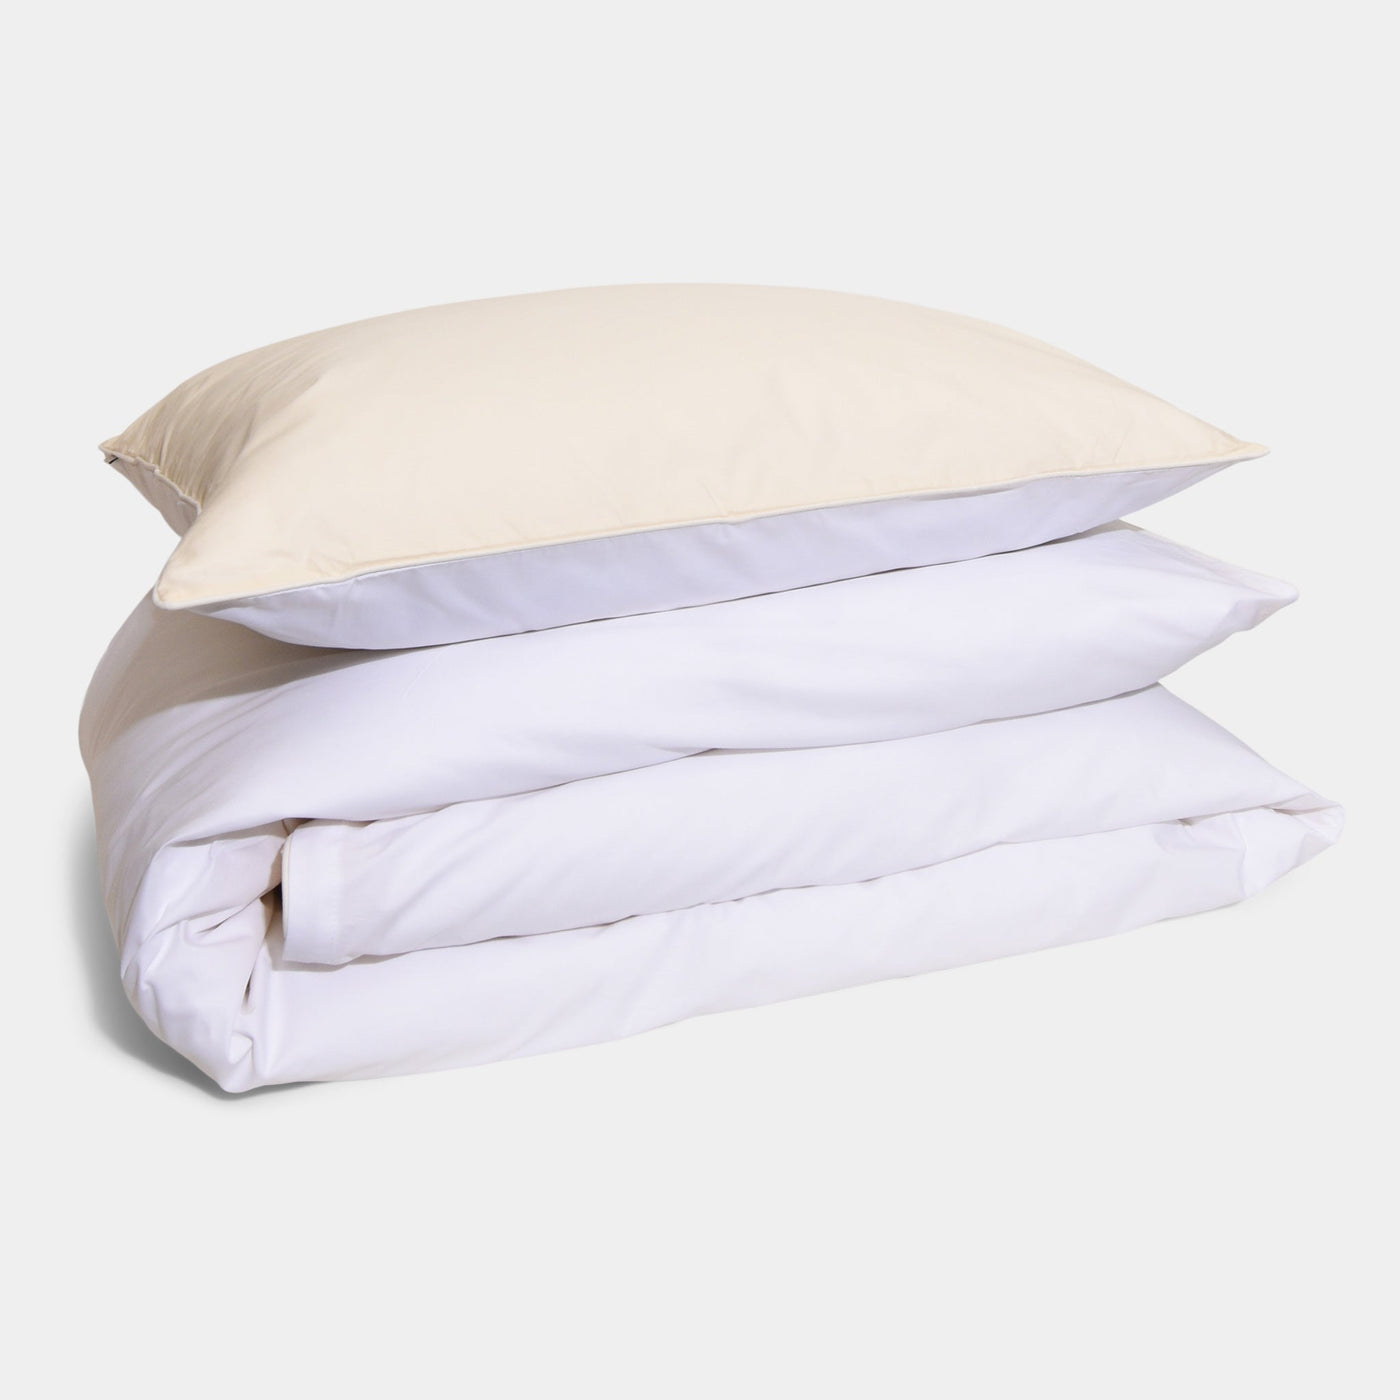 COTTON PERCALE duvet cover set, Cream & white with cream piping